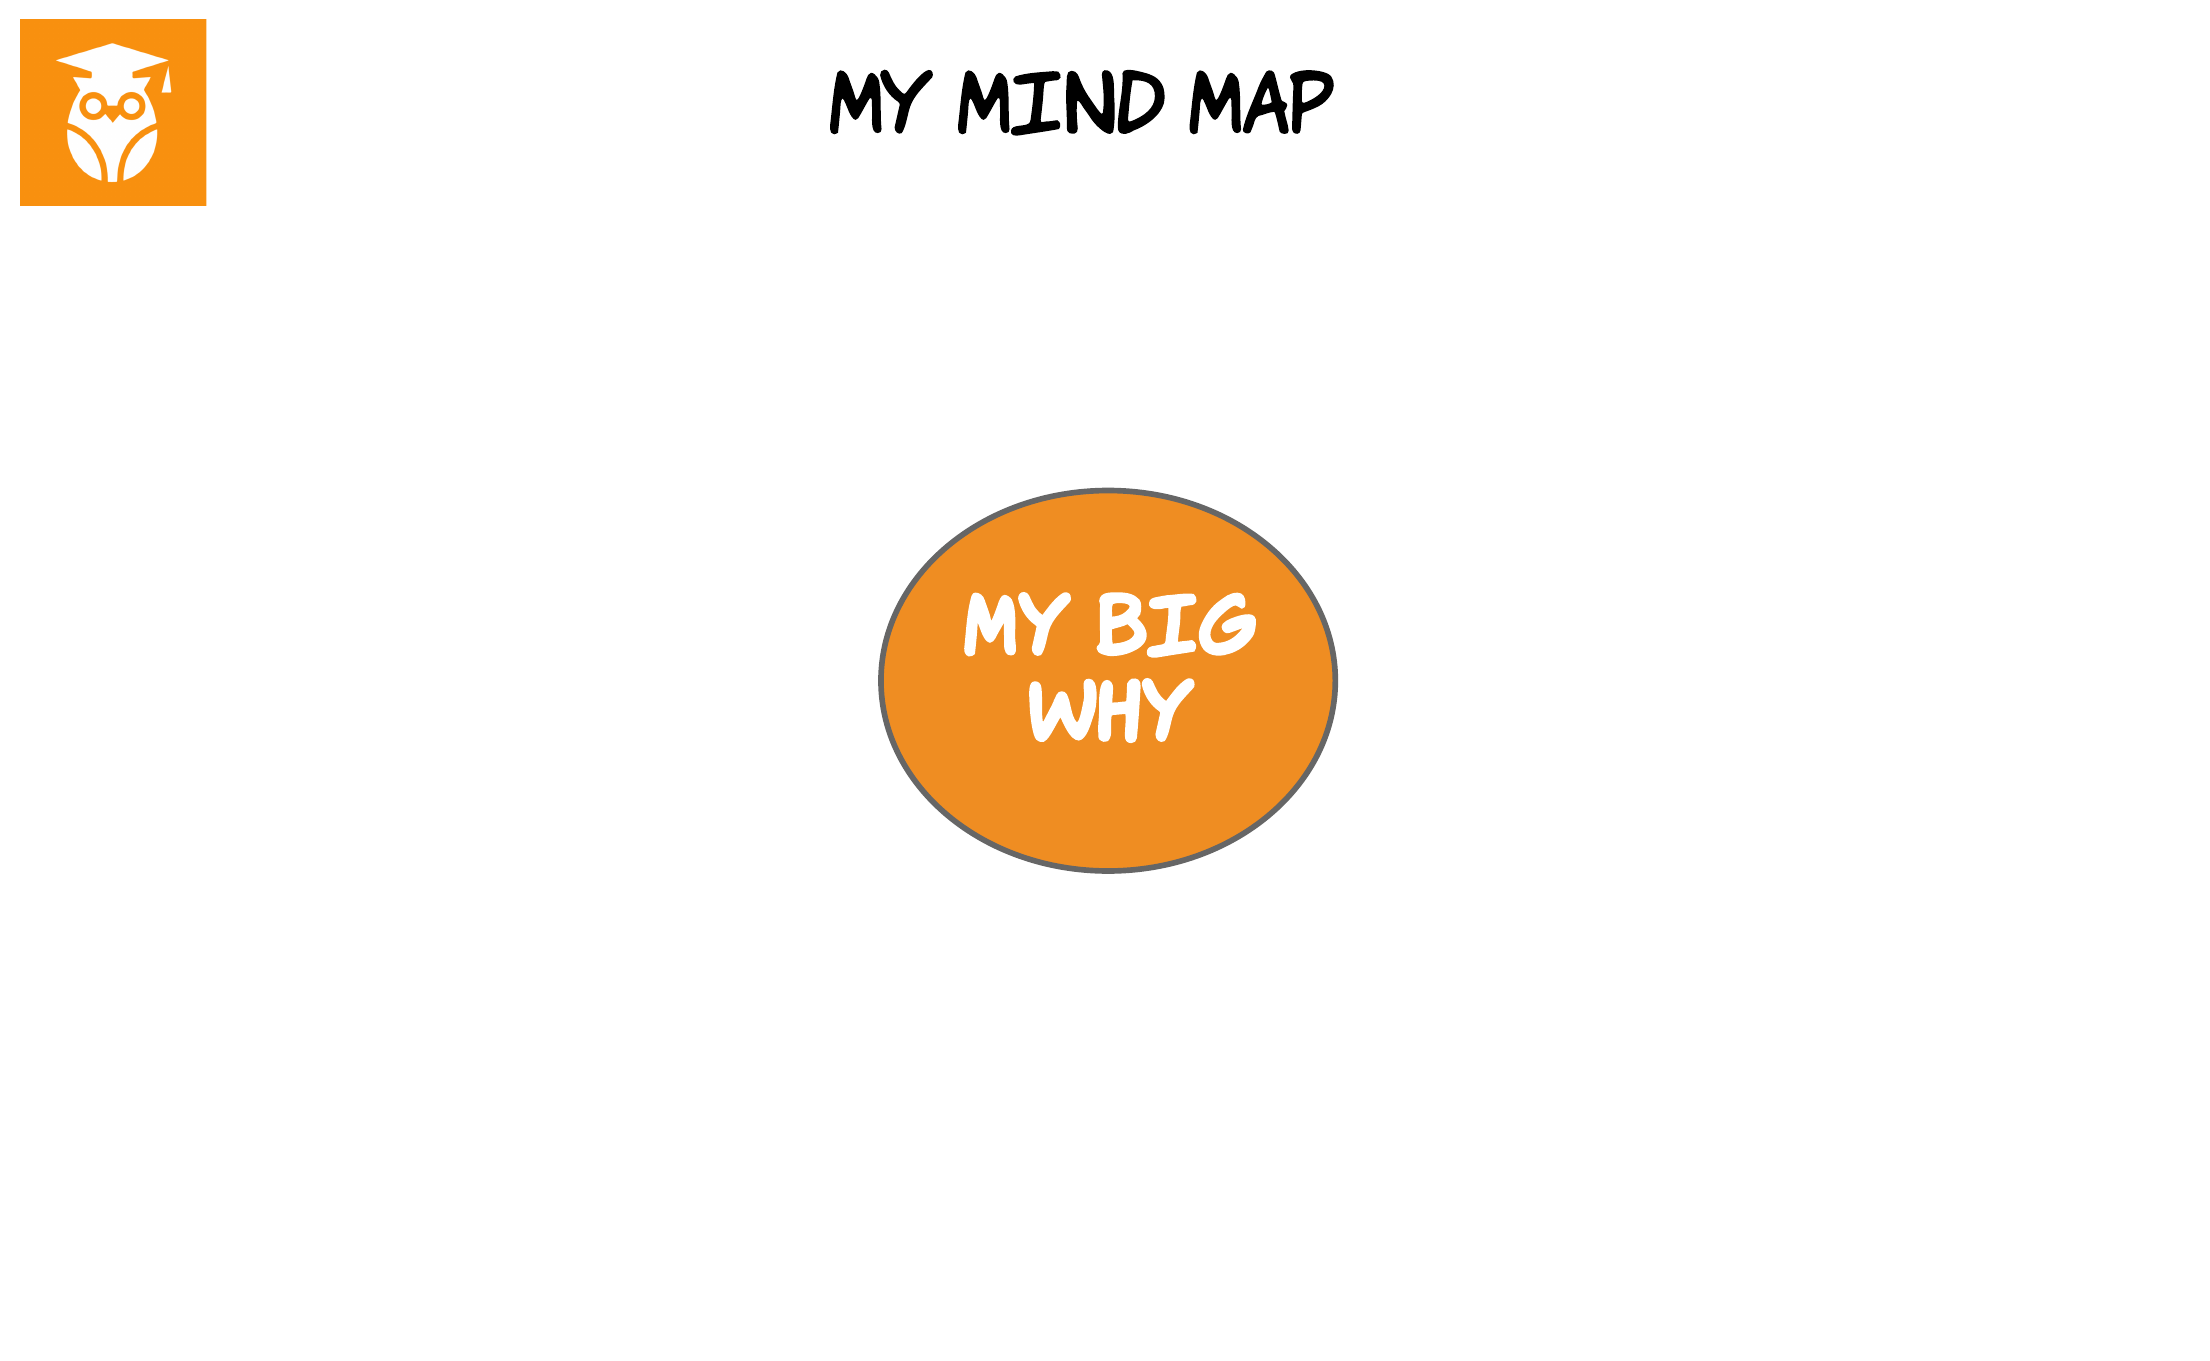 A mind map with a circle in the middle that says 